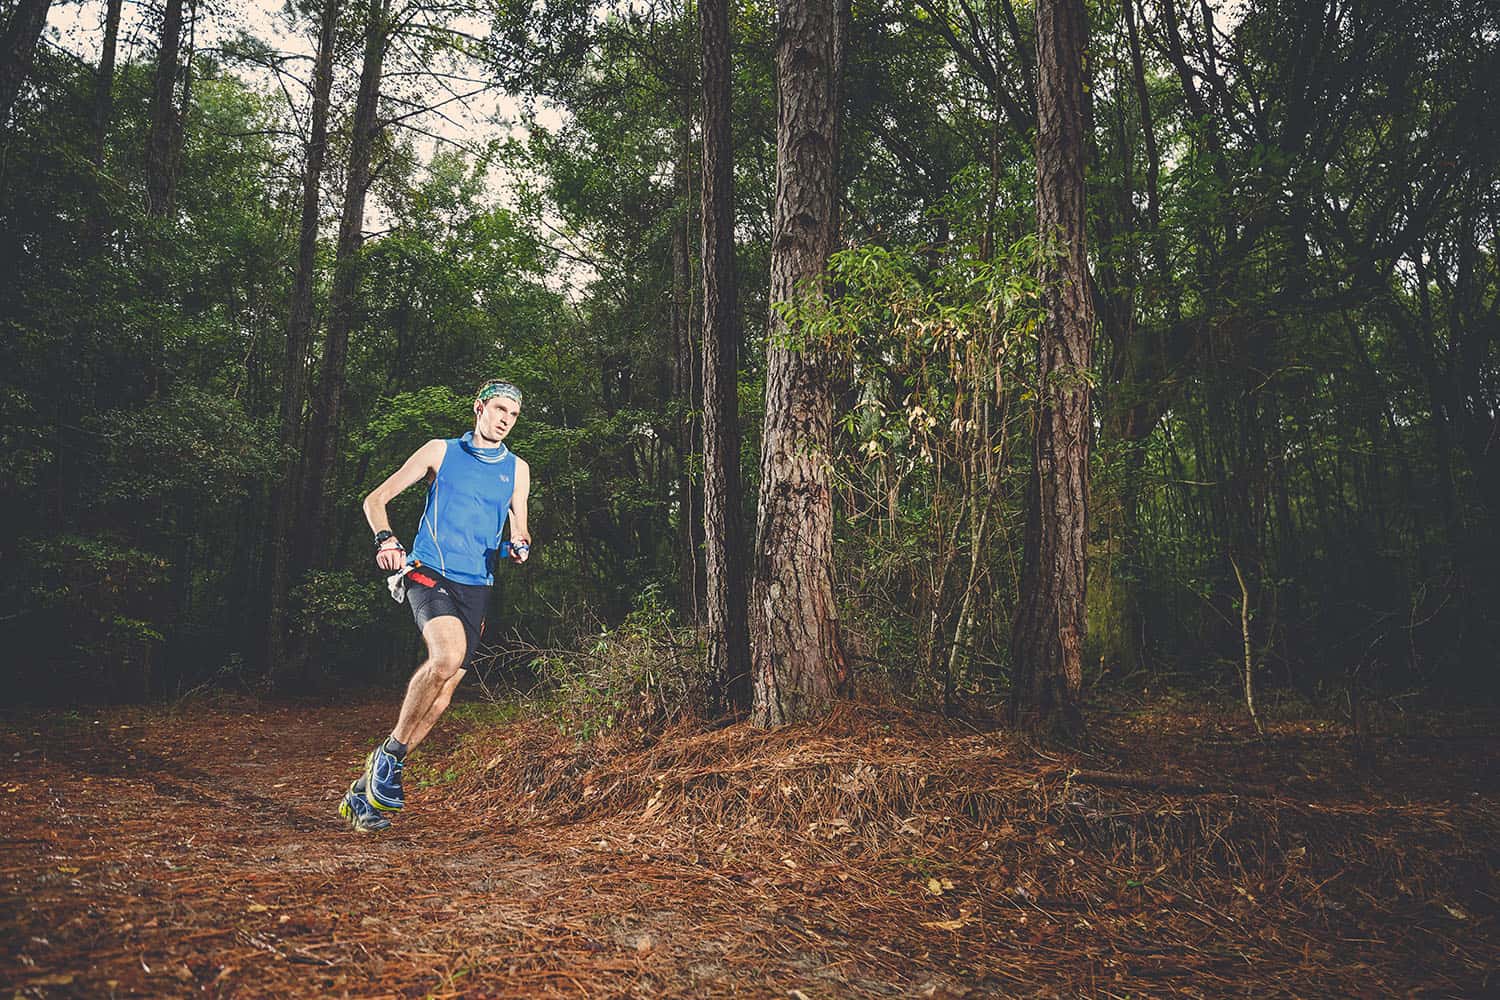 Proper Trail Running Form from the Raccoon Pond Rush Trail Race